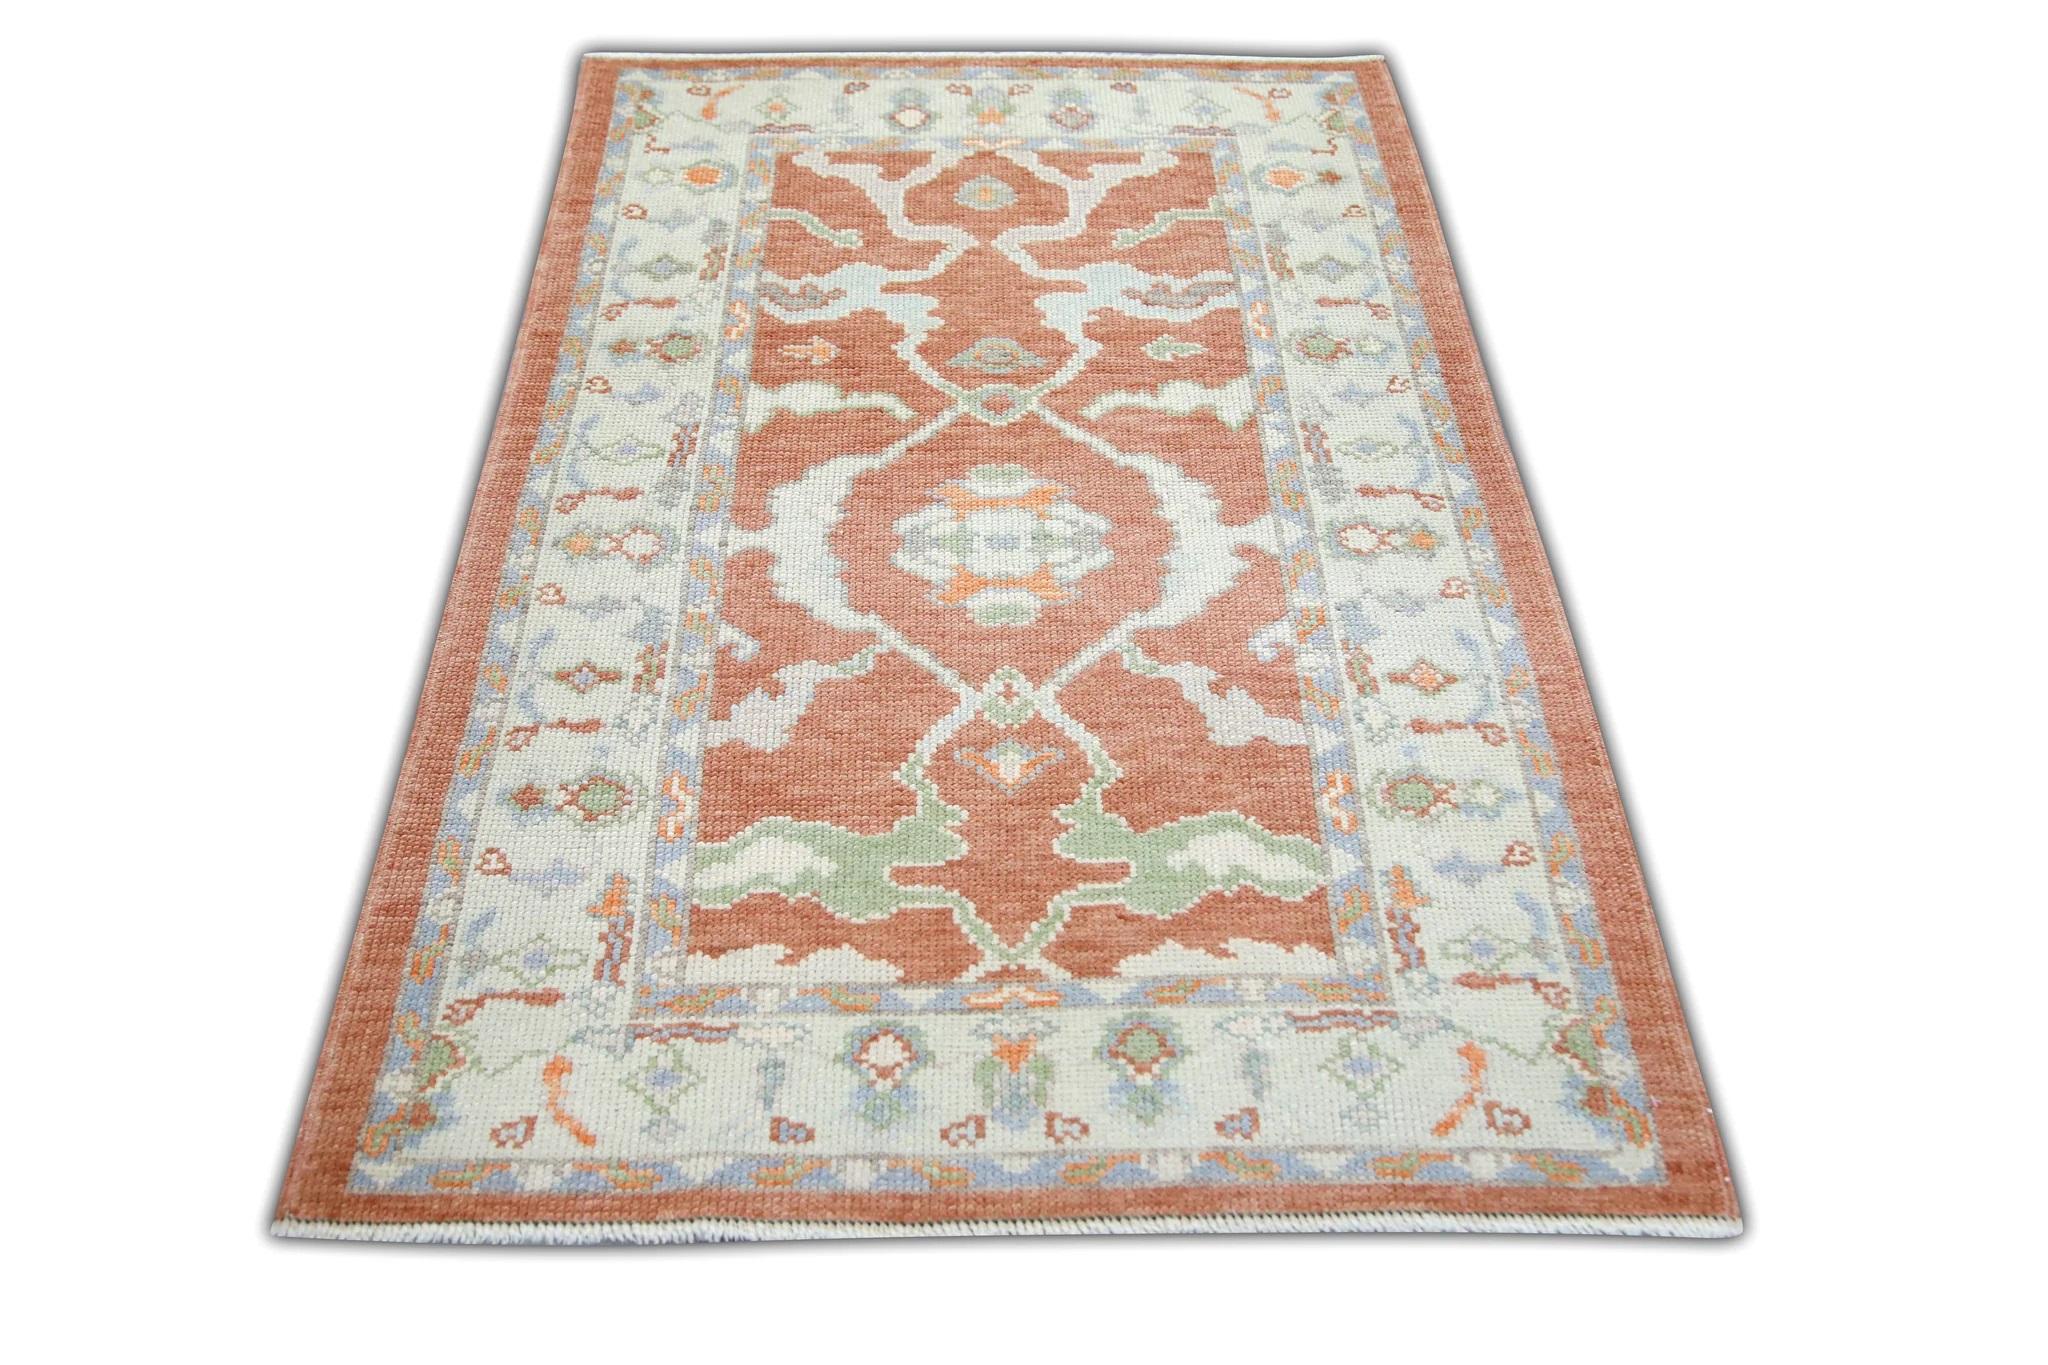 Contemporary All-Over Floral Handwoven Turkish Oushak Rug in Coral, Cream, and Blue 3'2 x 5'1 For Sale